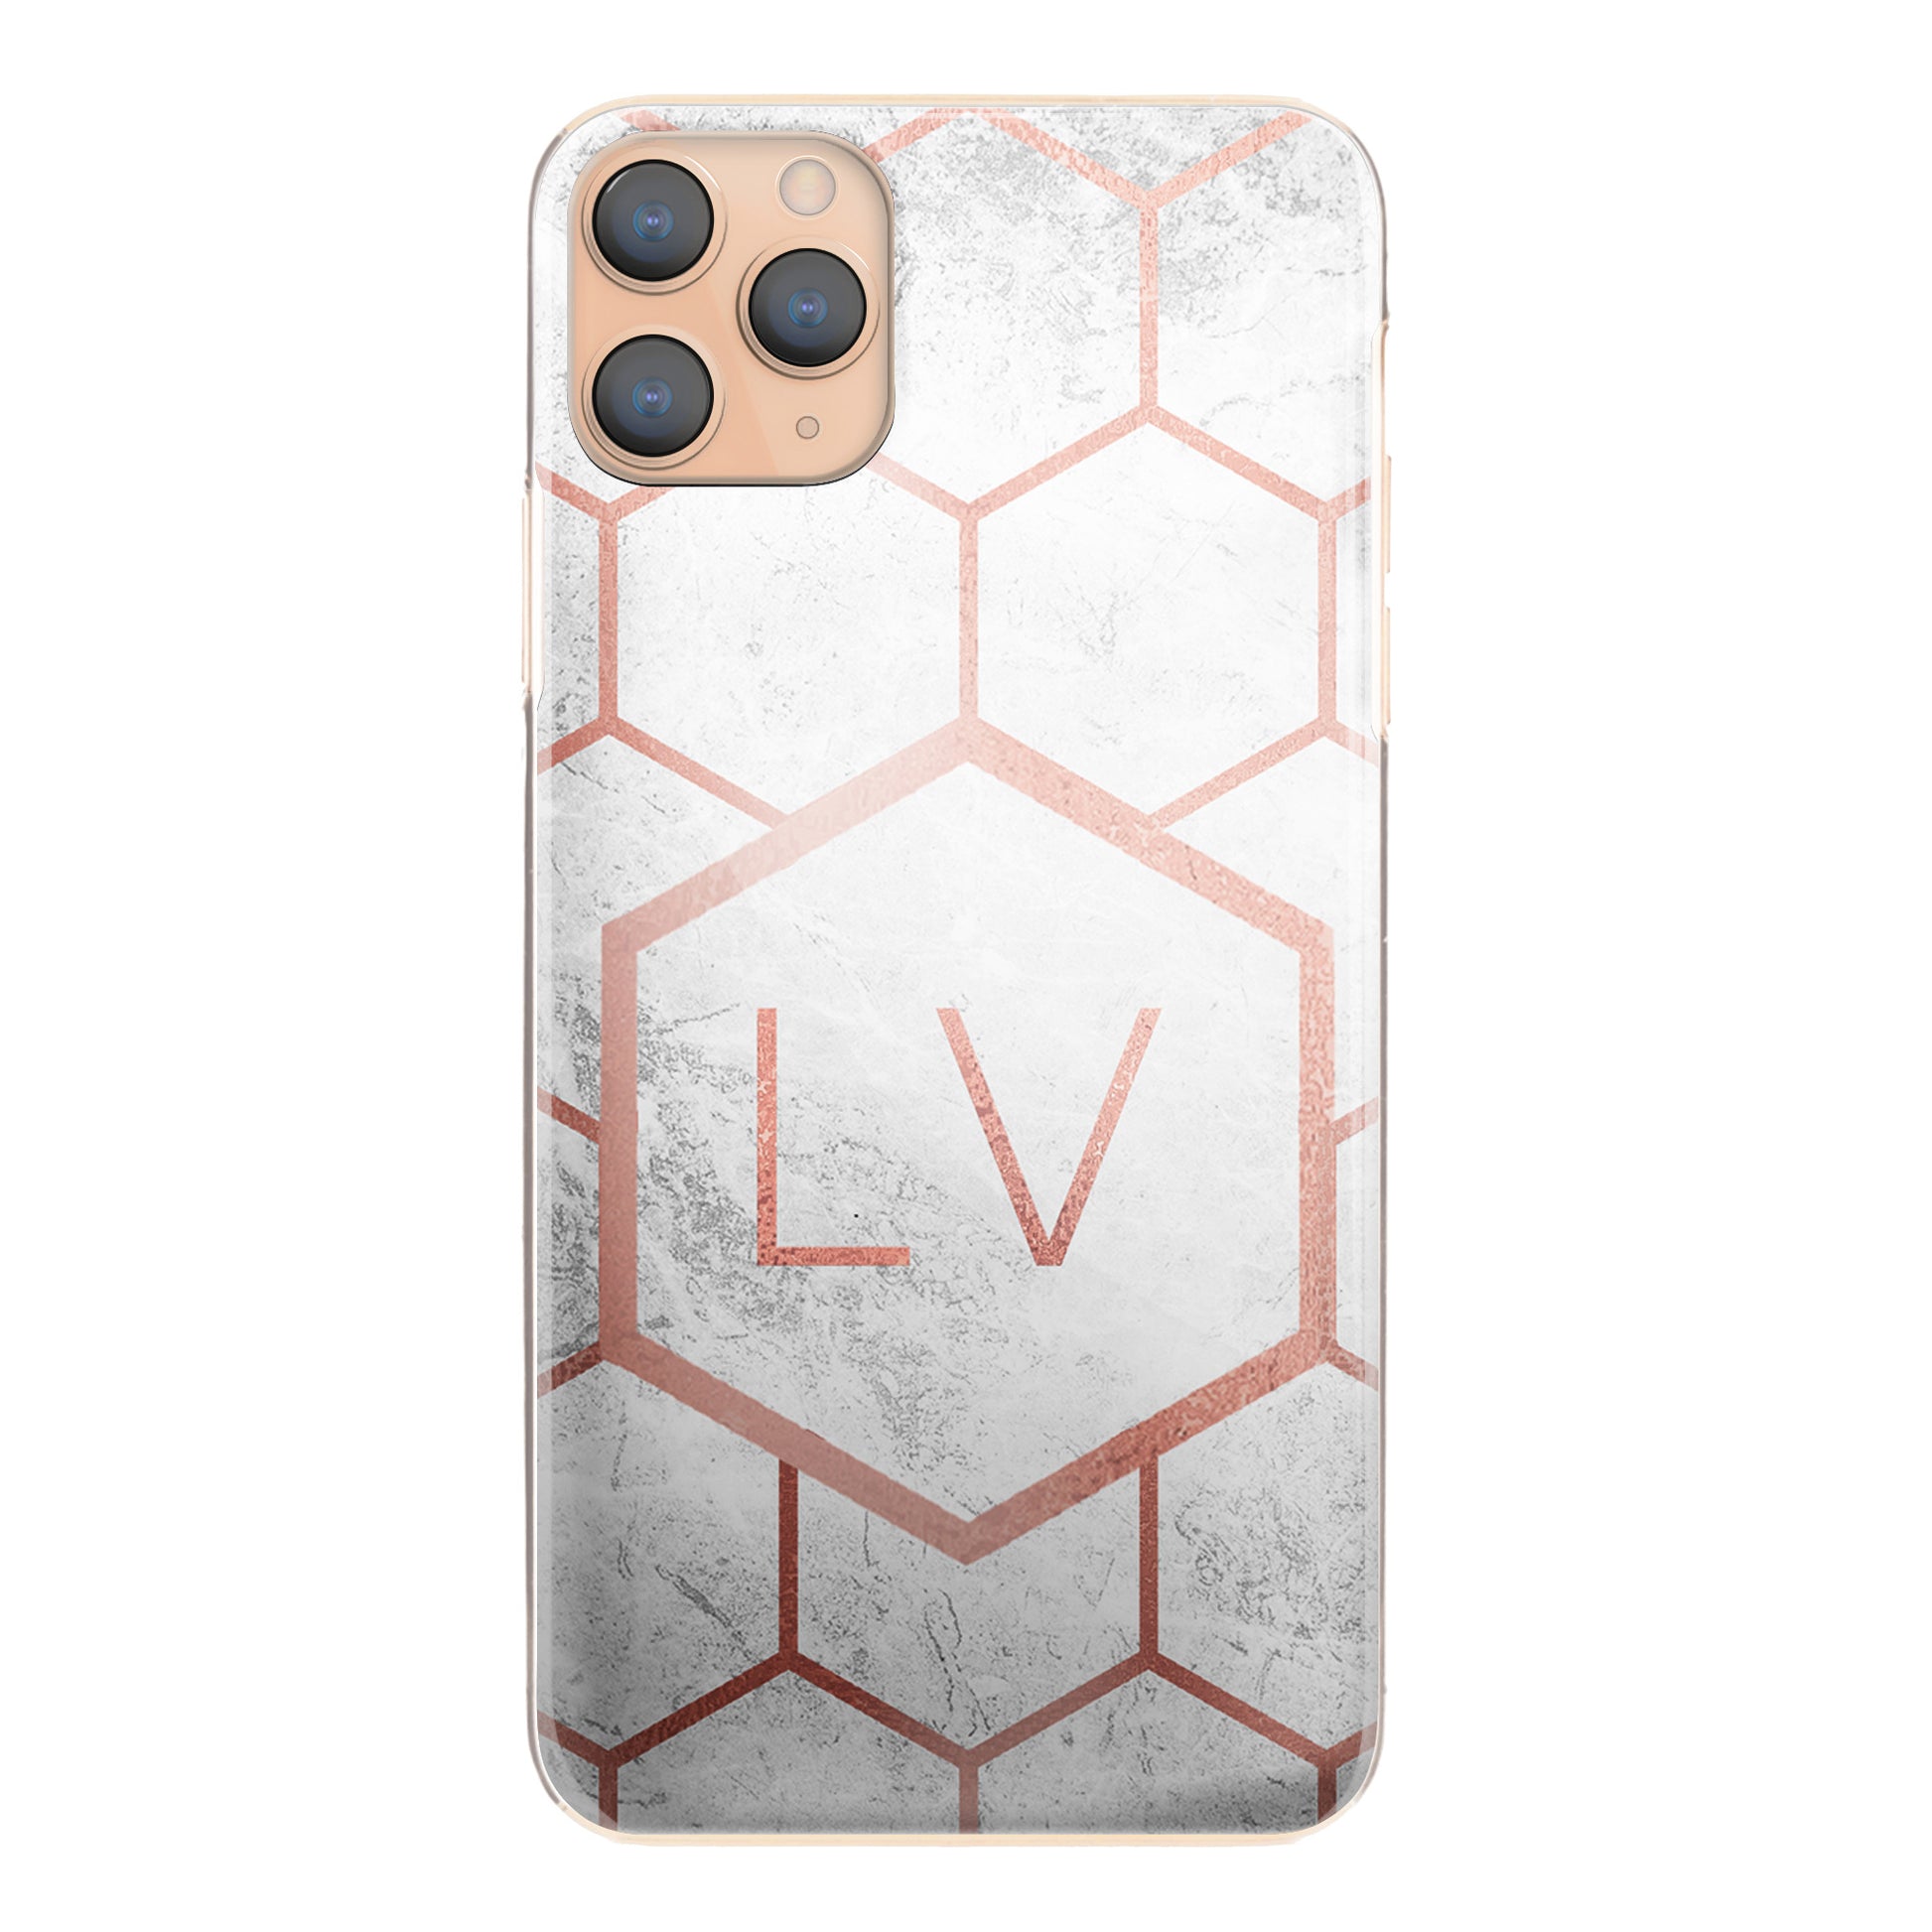 Personalised Samsung Galaxy Phone Hard Case with Pink Initials and Honeycomb Pattern on Grey Marble